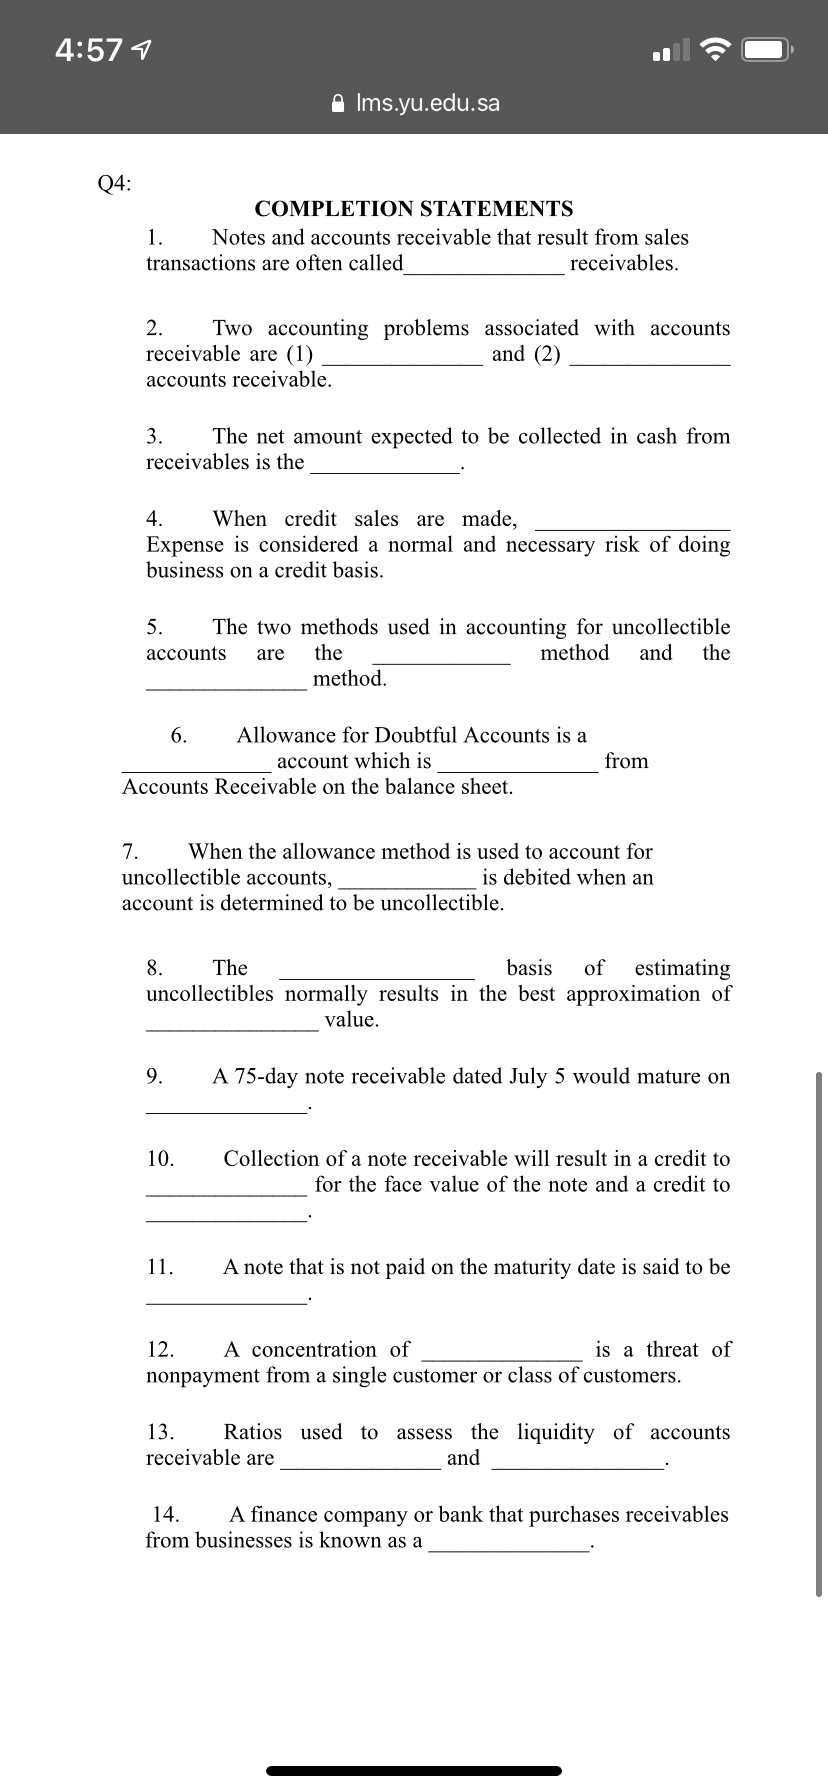 4:57 1
A Ims.yu.edu.sa
Q4:
COMPLETION STATEMENTS
1.
Notes and accounts receivable that result from sales
transactions are often called
receivables.
Two accounting problems associated with accounts
and (2)
2.
receivable are (1)
accounts receivable.
3.
The net amount expected to be collected in cash from
receivables is the
4.
When credit sales are made,
Expense is considered a normal and necessary risk of doing
business on a credit basis.
The two methods used in accounting for uncollectible
the
5.
the
method.
accounts
are
method
and
6.
Allowance for Doubtful Accounts is a
account which is
from
Accounts Receivable on the balance sheet.
7.
When the allowance method is used to account for
uncollectible accounts,
is debited when an
account is determined to be uncollectible.
estimating
uncollectibles normally results in the best approximation of
8.
The
basis
of
value.
9.
A 75-day note receivable dated July 5 would mature on
10.
Collection of a note receivable will result in a credit to
for the face value of the note and a credit to
11.
A note that is not paid on the maturity date is said to be
A concentration of
is a threat of
nonpayment from a single customer or class of customers.
12.
Ratios used to assess the liquidity of accounts
and
13.
receivable are
14.
A finance company or bank that purchases receivables
from businesses is known as a
